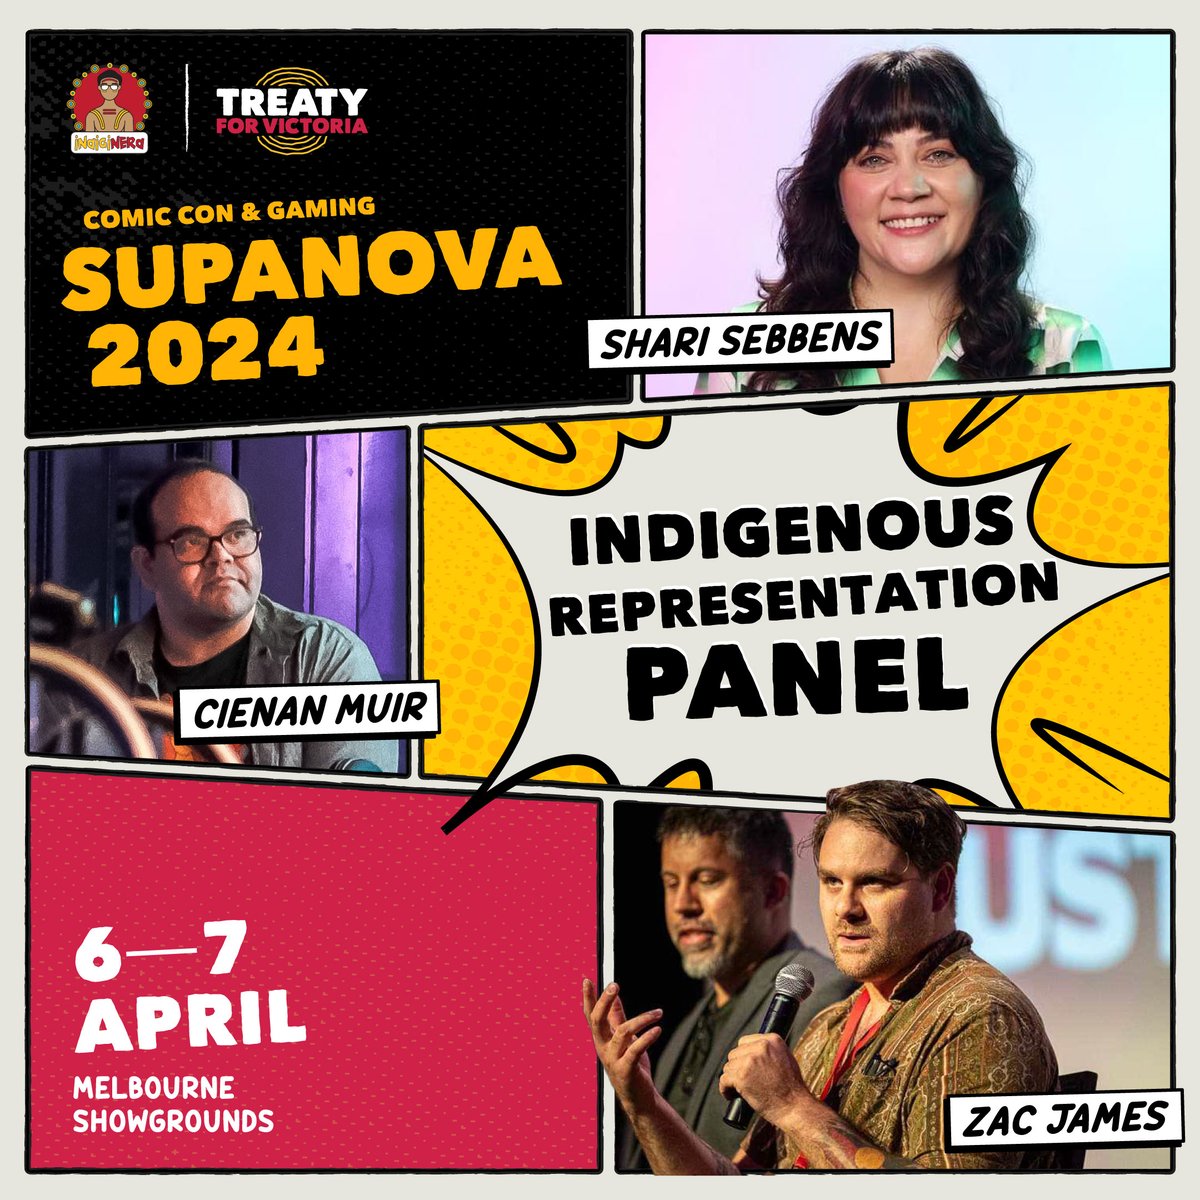 If you are going to be at Supanova next week, make sure you get along to the Indigenous Representation Panel 🖤💛❤️